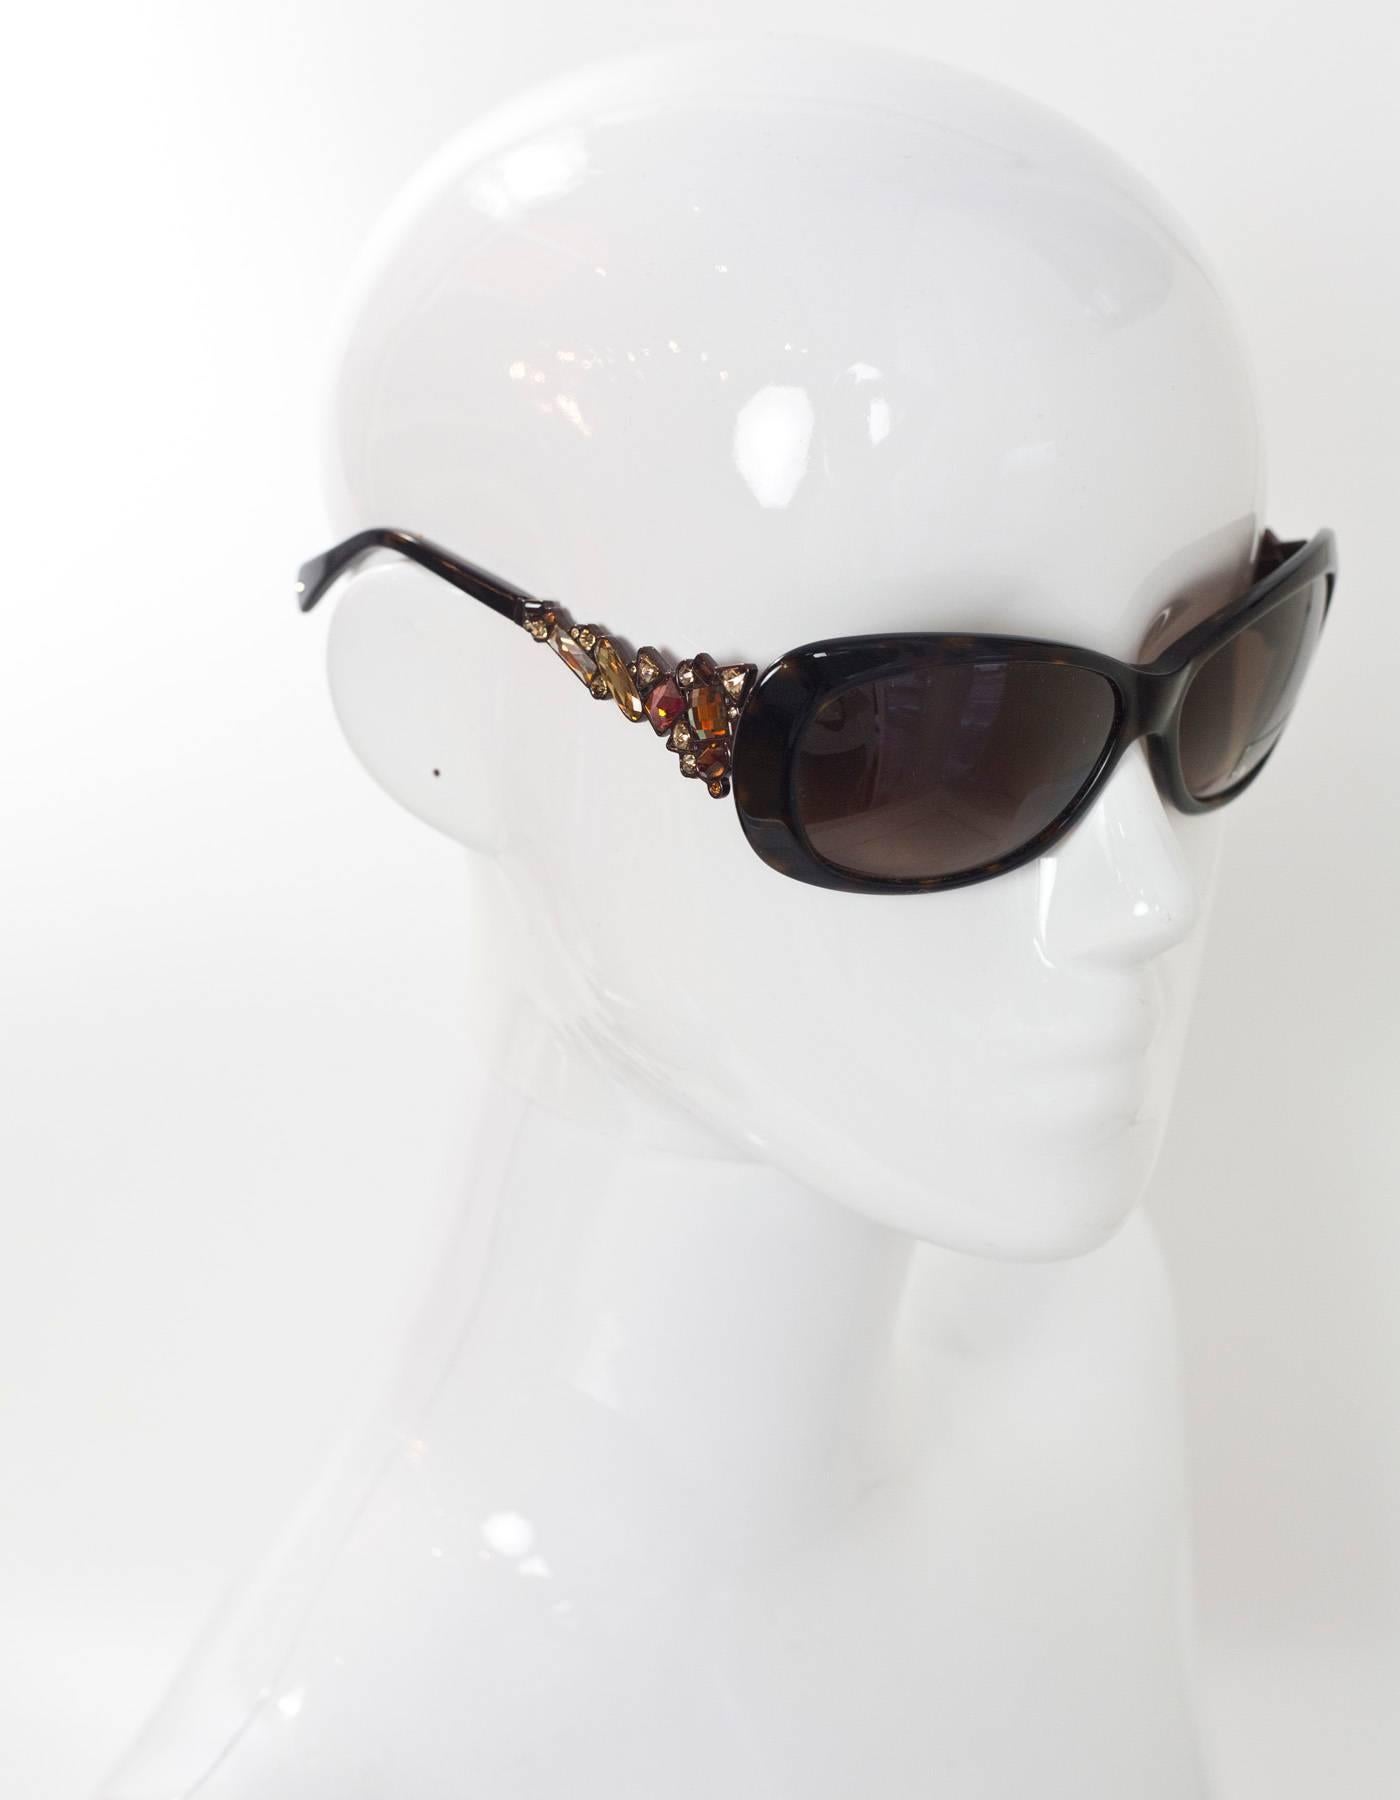 Judith Leiber Brown Tortoise Swarovski Crystal Sunglasses
Features topaz crystals at arms

Made In: Japan
Color: Brown/tortoise
Materials: Resin, crystal
Retail Price: $620 + tax
Overall Condition: Excellent pre-owned condition
Includes: Judith